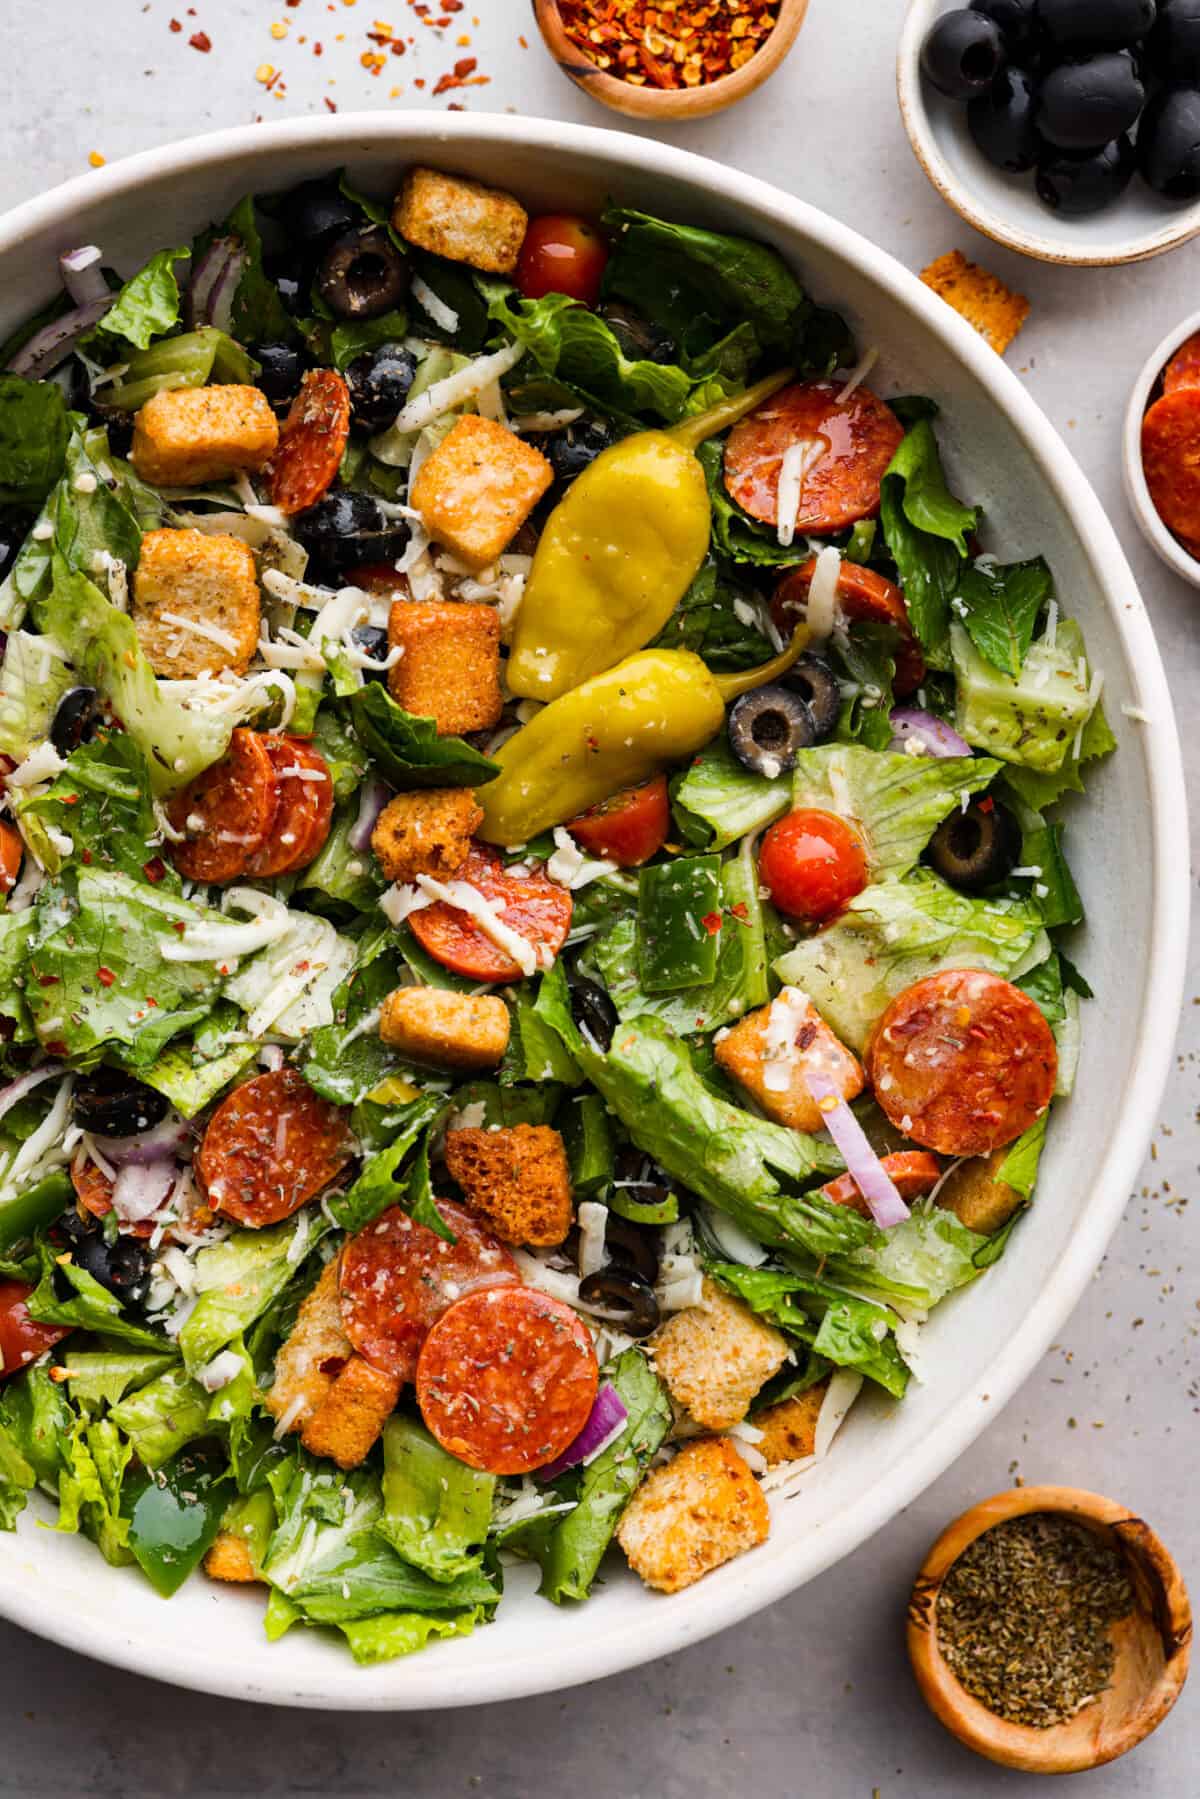 A bowl of lettuce with croutons, pepperoni, olives, tomatoes, purple onions,green bell peppers and cheese with Italian dressing. 